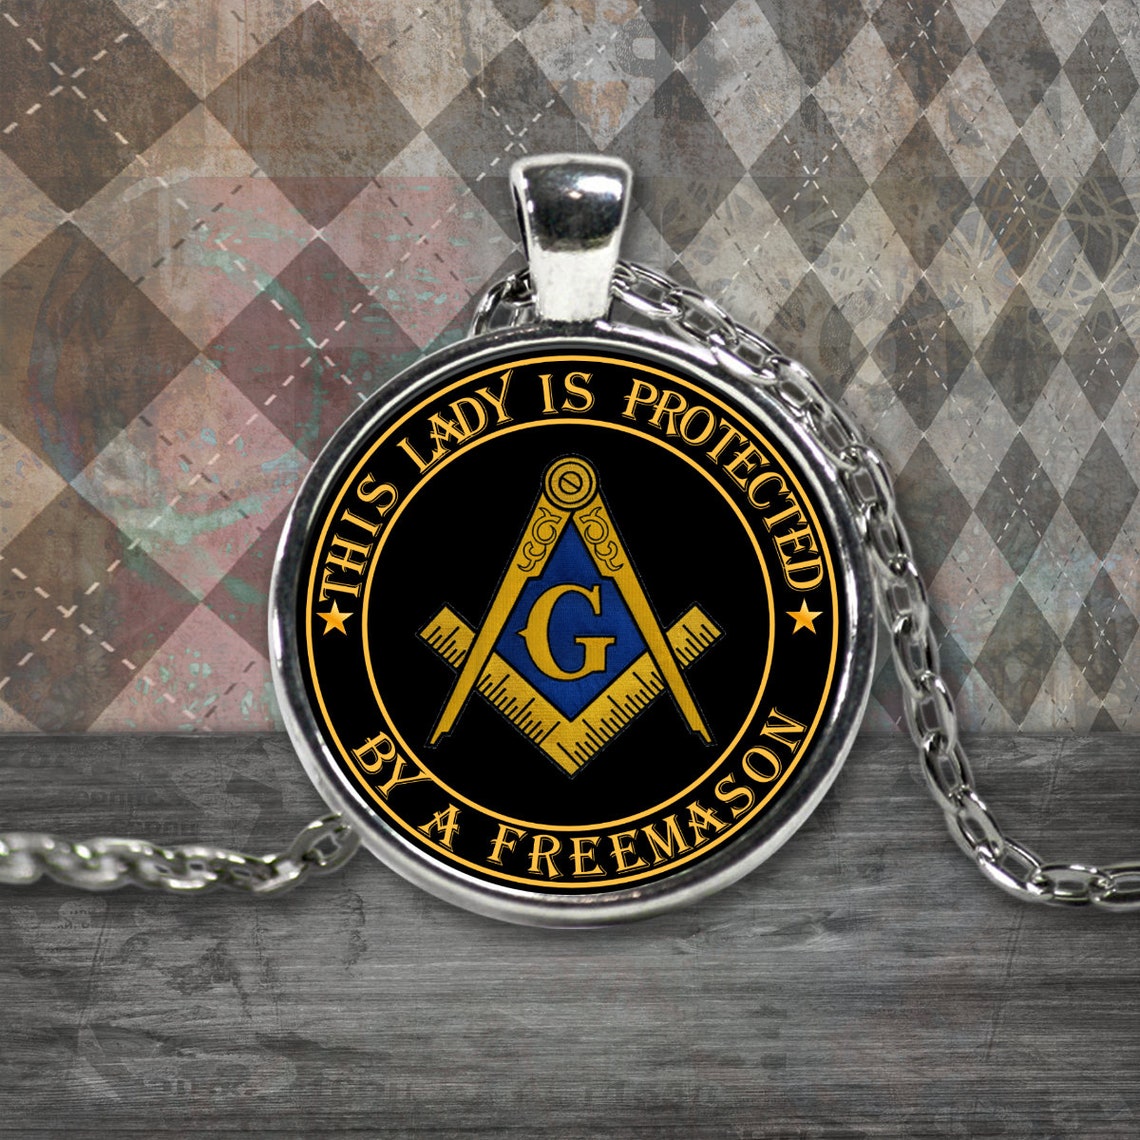 Masonic necklace This Lady is protected by a Freemason | Etsy